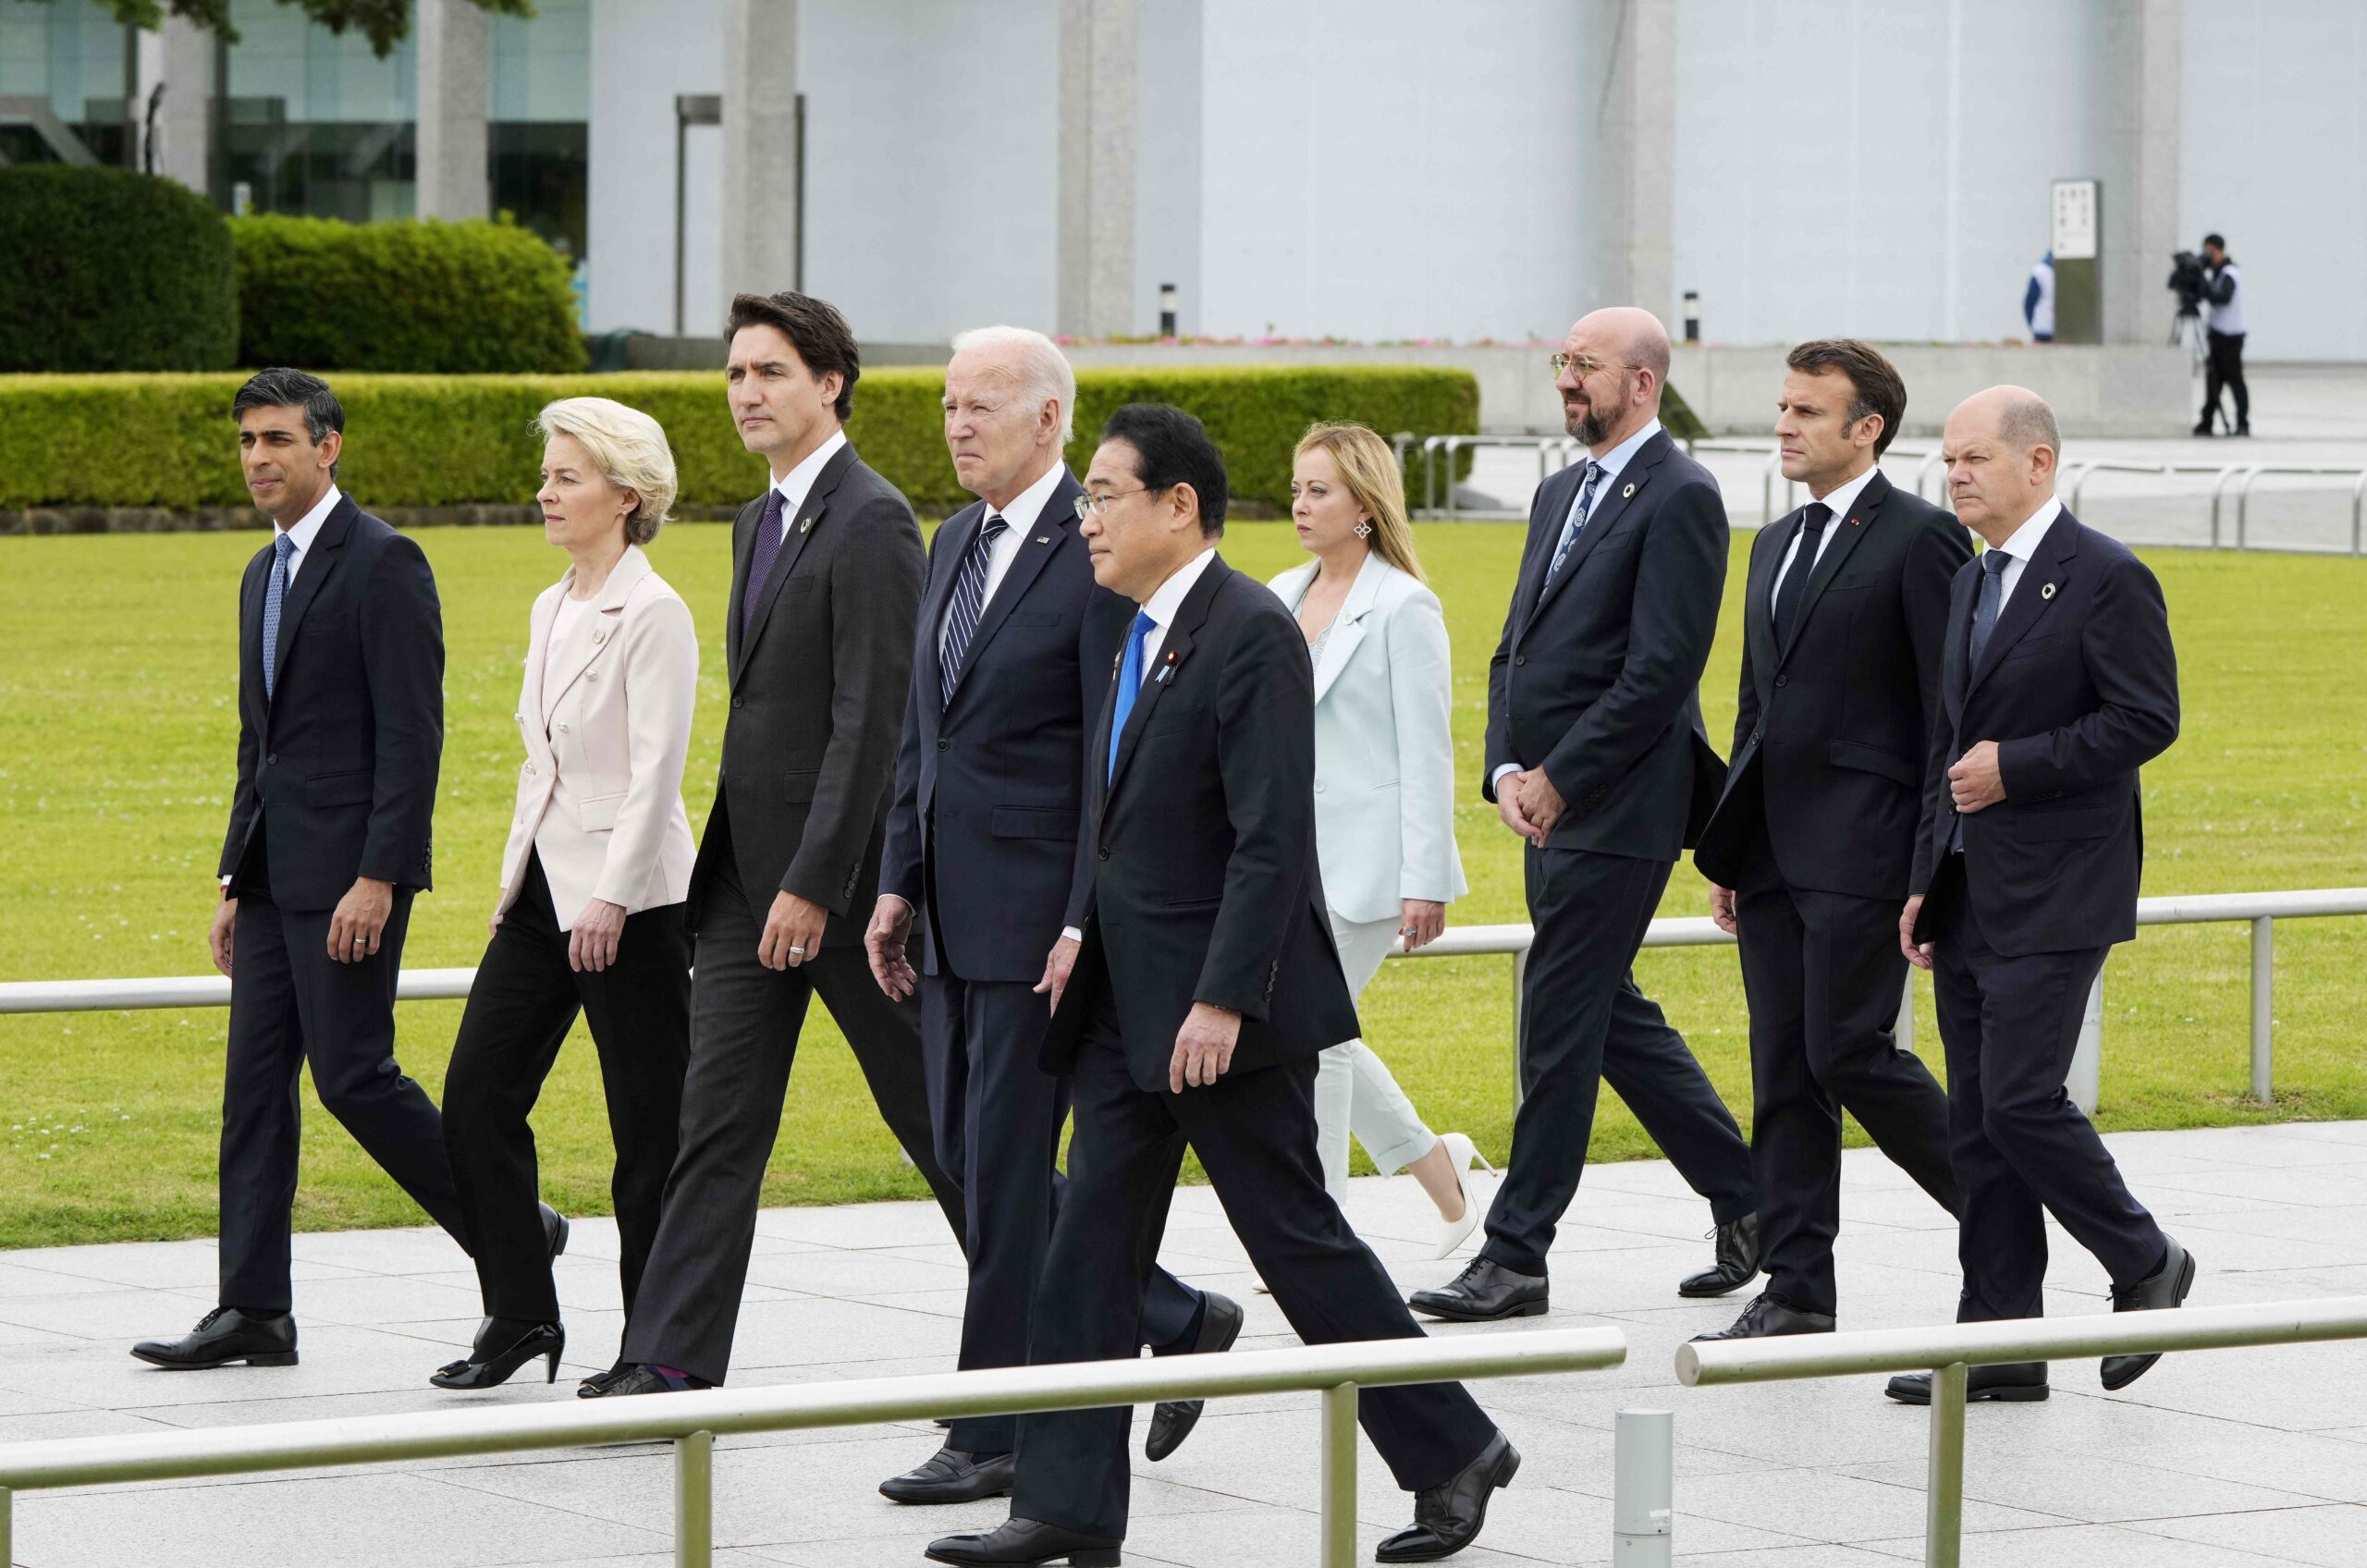 TOPSHOT - (L-R) British Prime Minister Rishi Sunak, European Commission President Ursula von der Leyen, Canadian Prime Minister Justin Trudeau, US President Joe Biden, Japan's Prime Minister Fumio Kishida, Italian Prime Minister Giorgia Meloni, European Council President Charles Michel, French President Emmanuel Macron, German Chancellor Olaf Scholz walk to a flower wreath laying ceremony at the Cenotaph for Atomic Bomb Victims in the Peace Memorial Park as part of the G7 Leaders' Summit in Hiroshima on May 19, 2023. (Photo by Franck ROBICHON / POOL / AFP) (Photo by FRANCK ROBICHON/POOL/AFP via Getty Images)
TOPSHOT-JAPAN-G7-SUMMIT